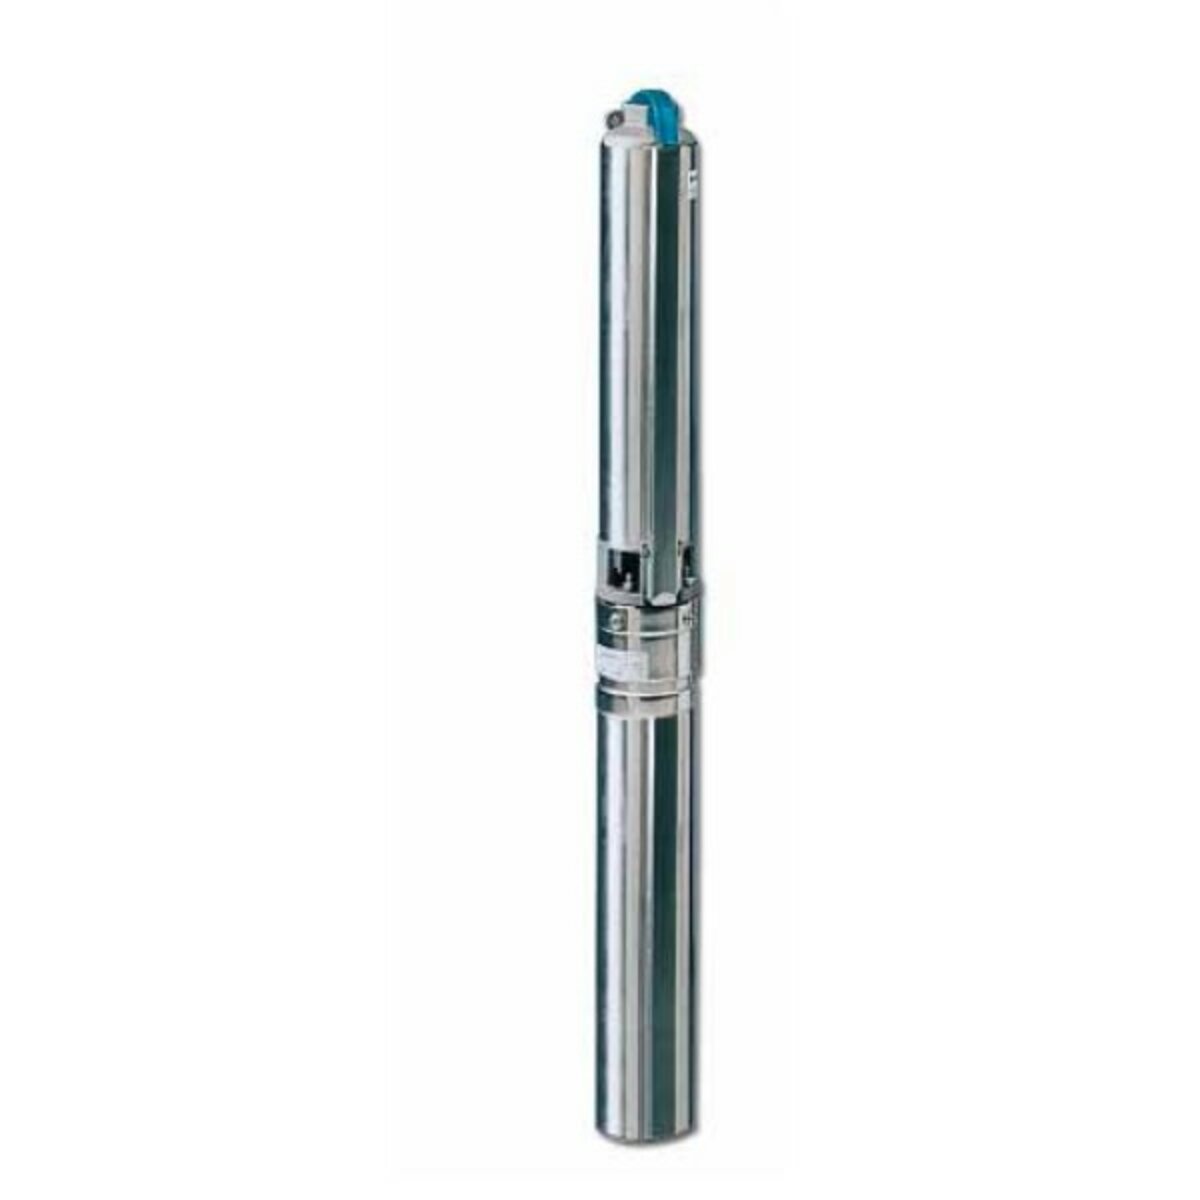 Lowara-Xylem submersible pump for single-phase wells hp 1,5 kW 1,1 GS series 4